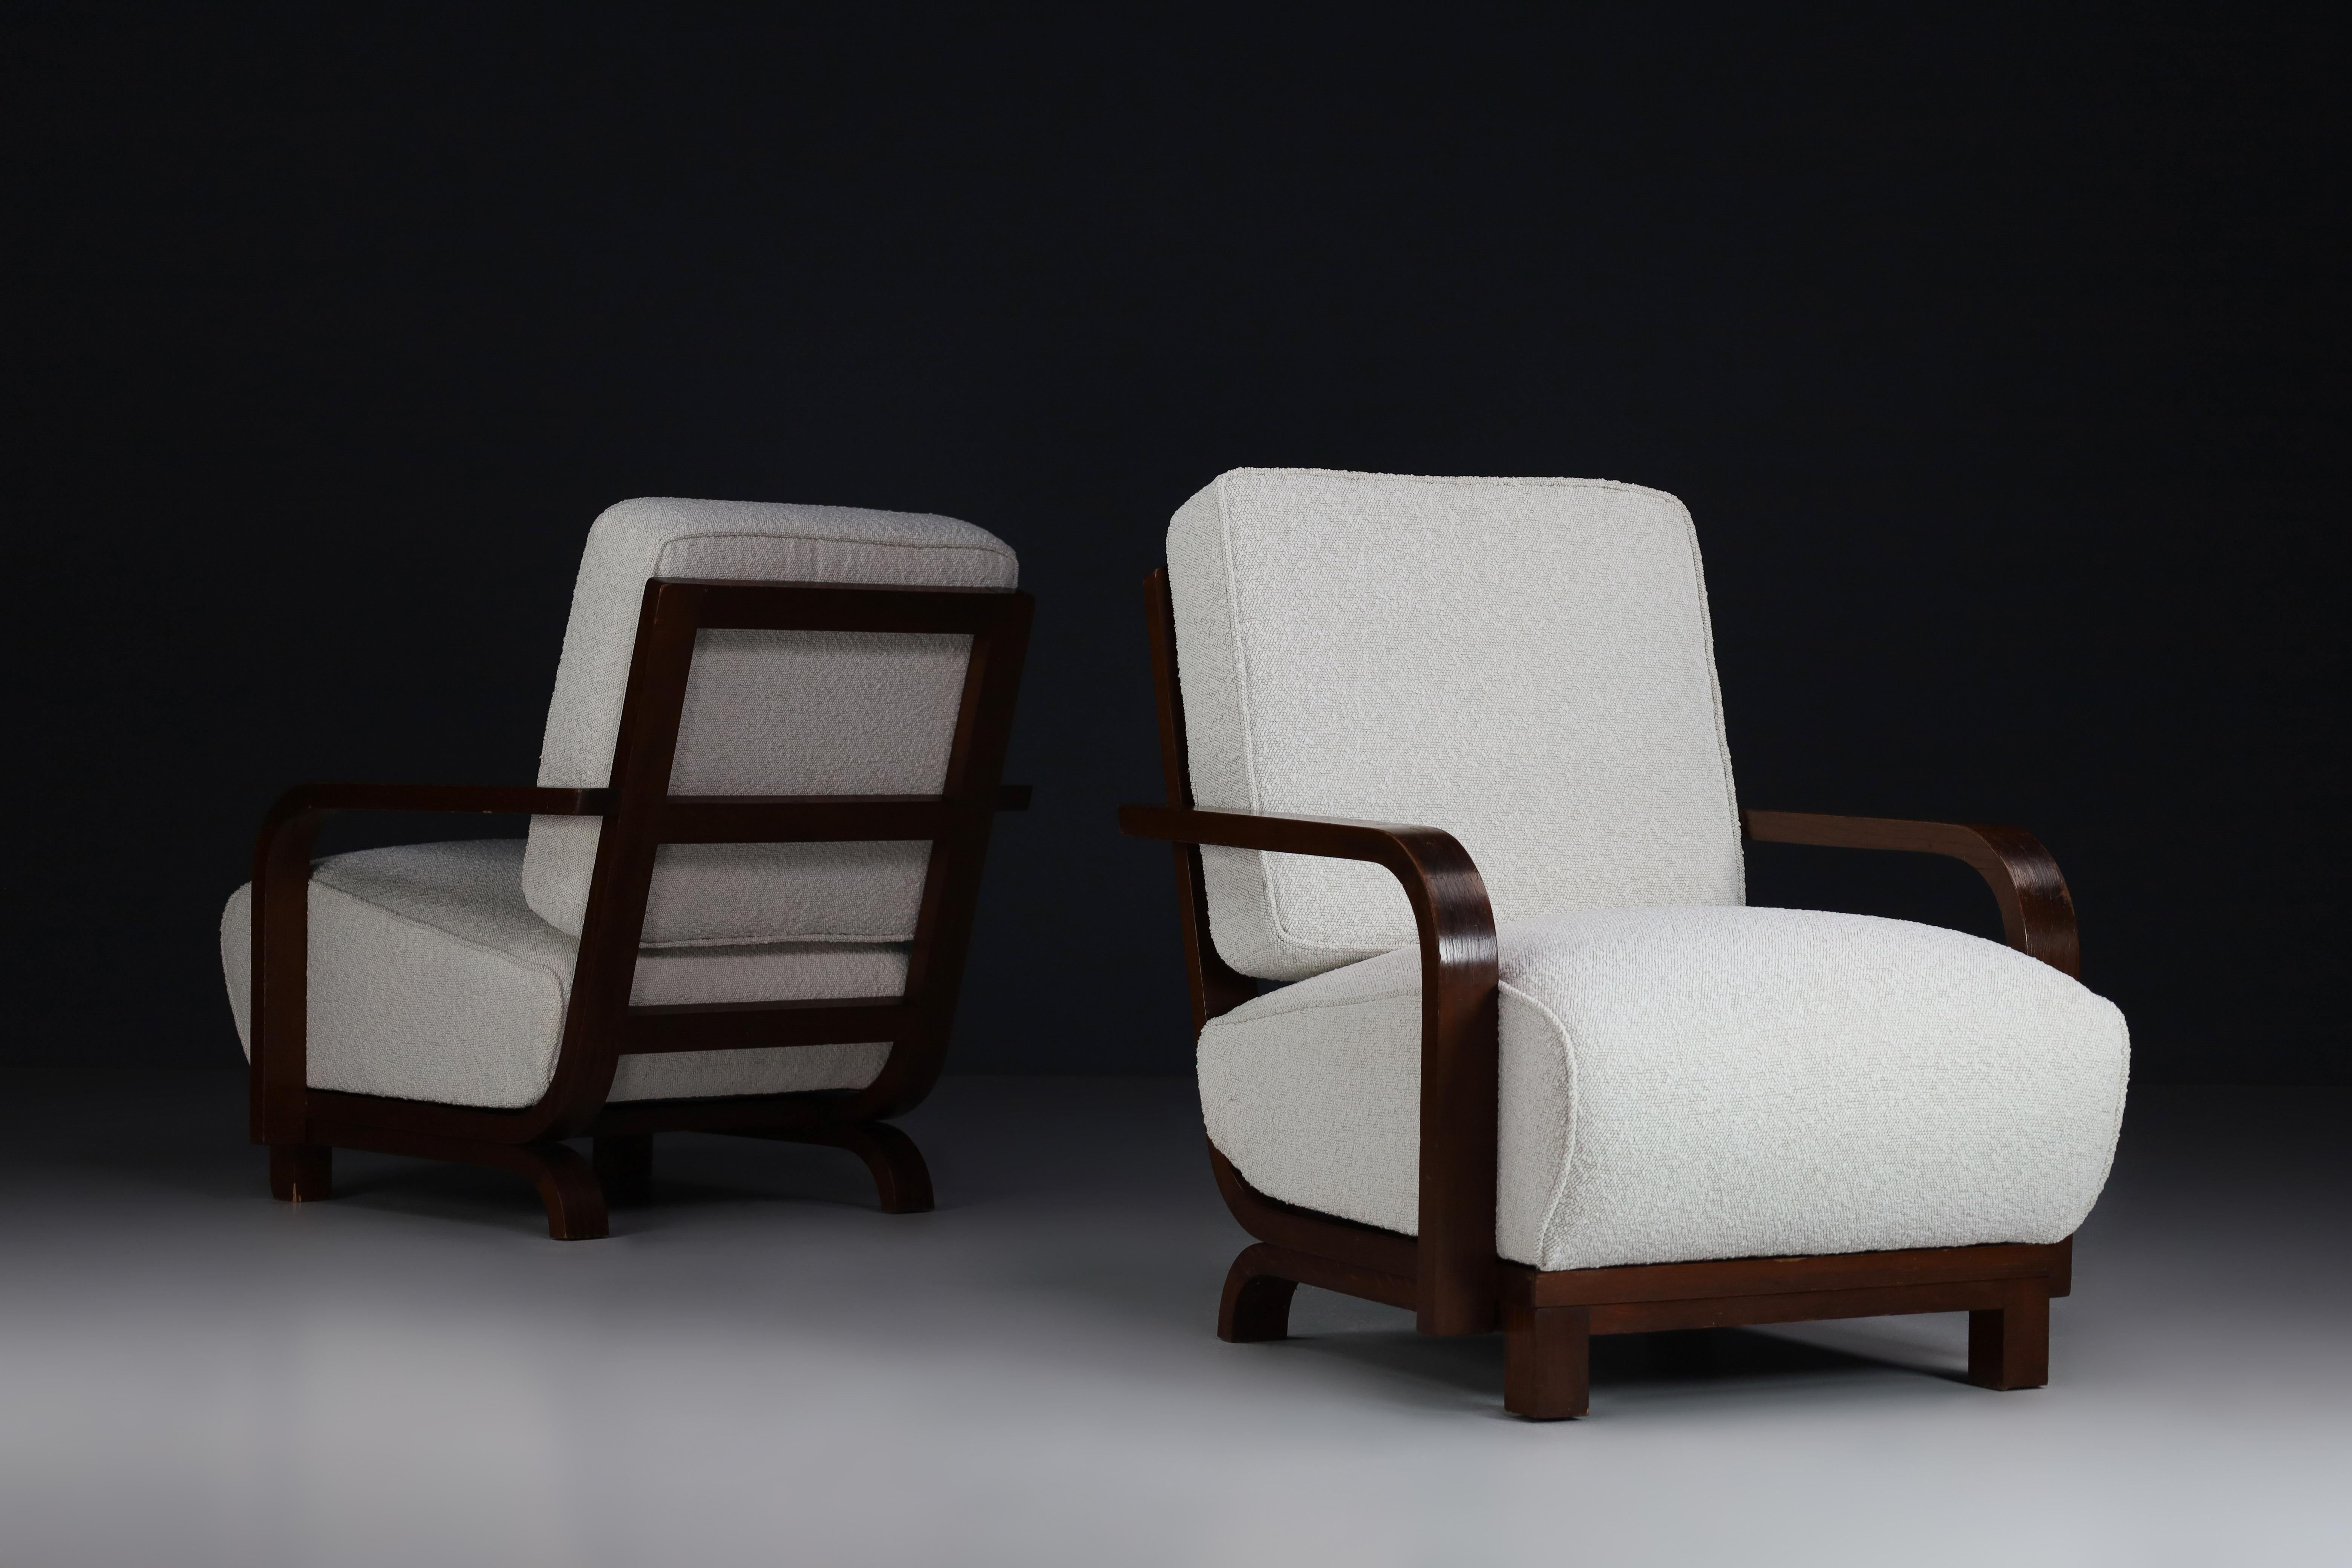 Czech Art Deco Armchairs in Bentwood and Bouclé Upholstery, Prague, the 1930s